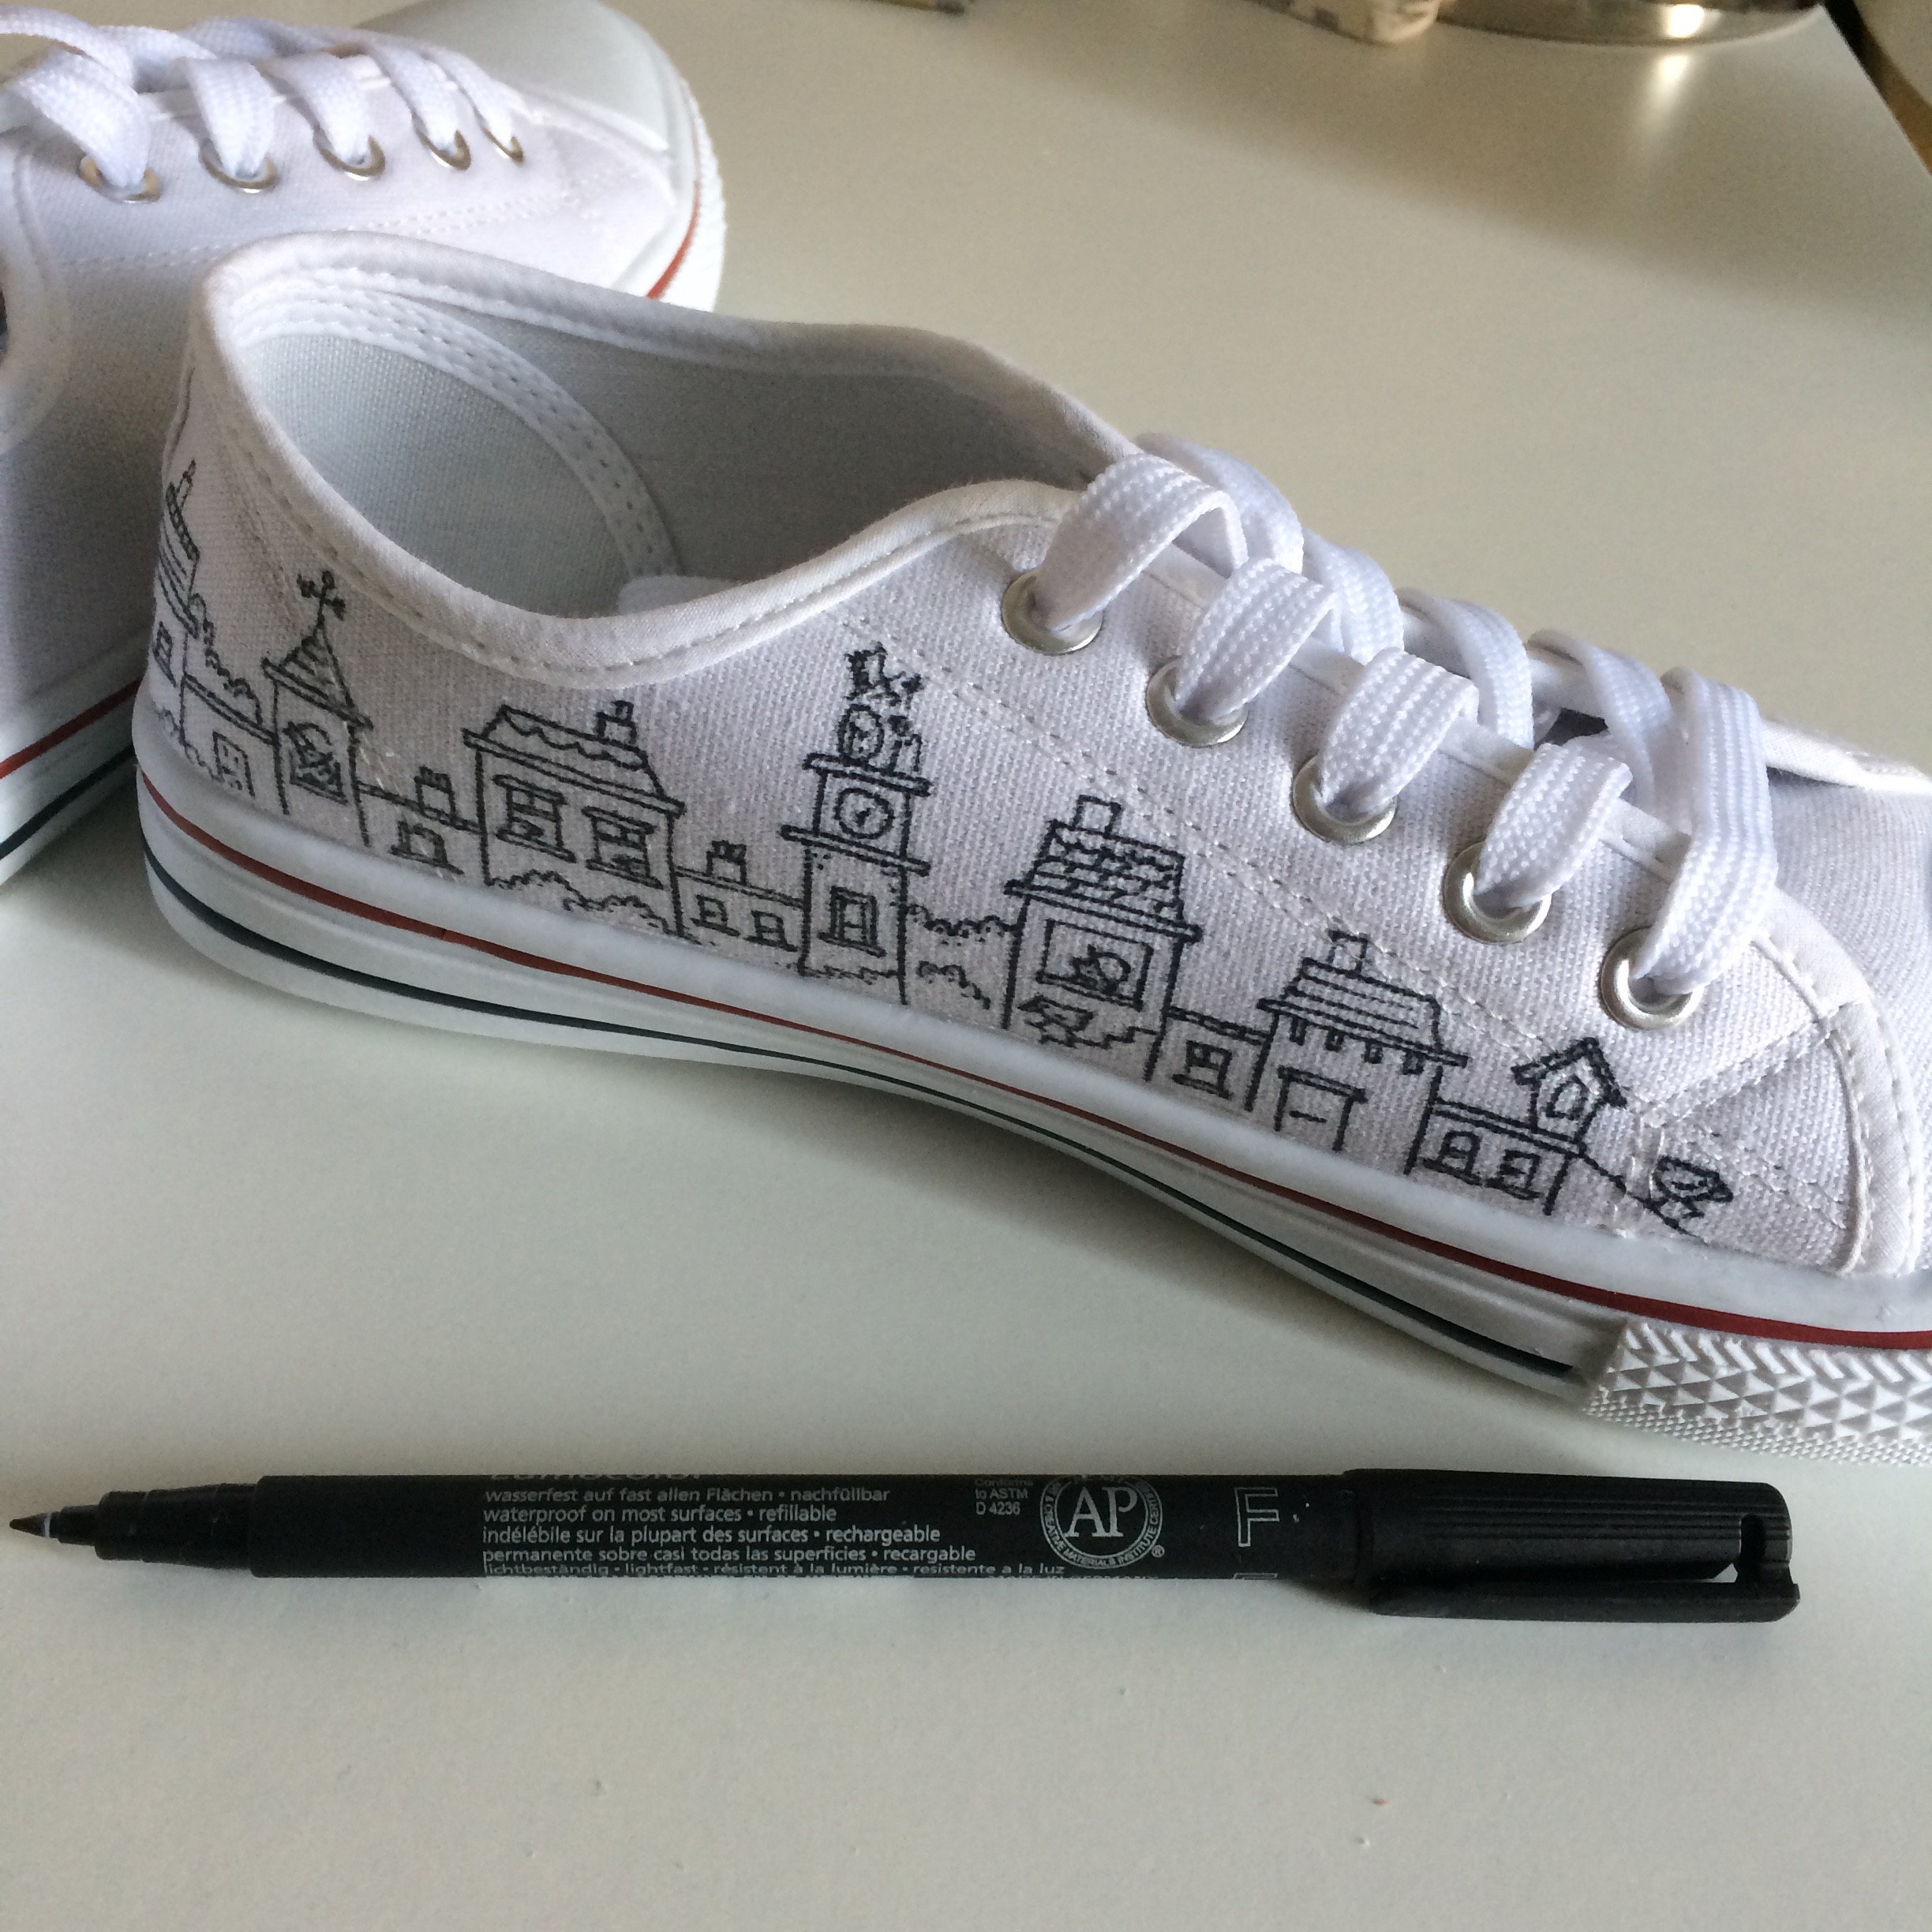 Converse – Drawing on sneakers